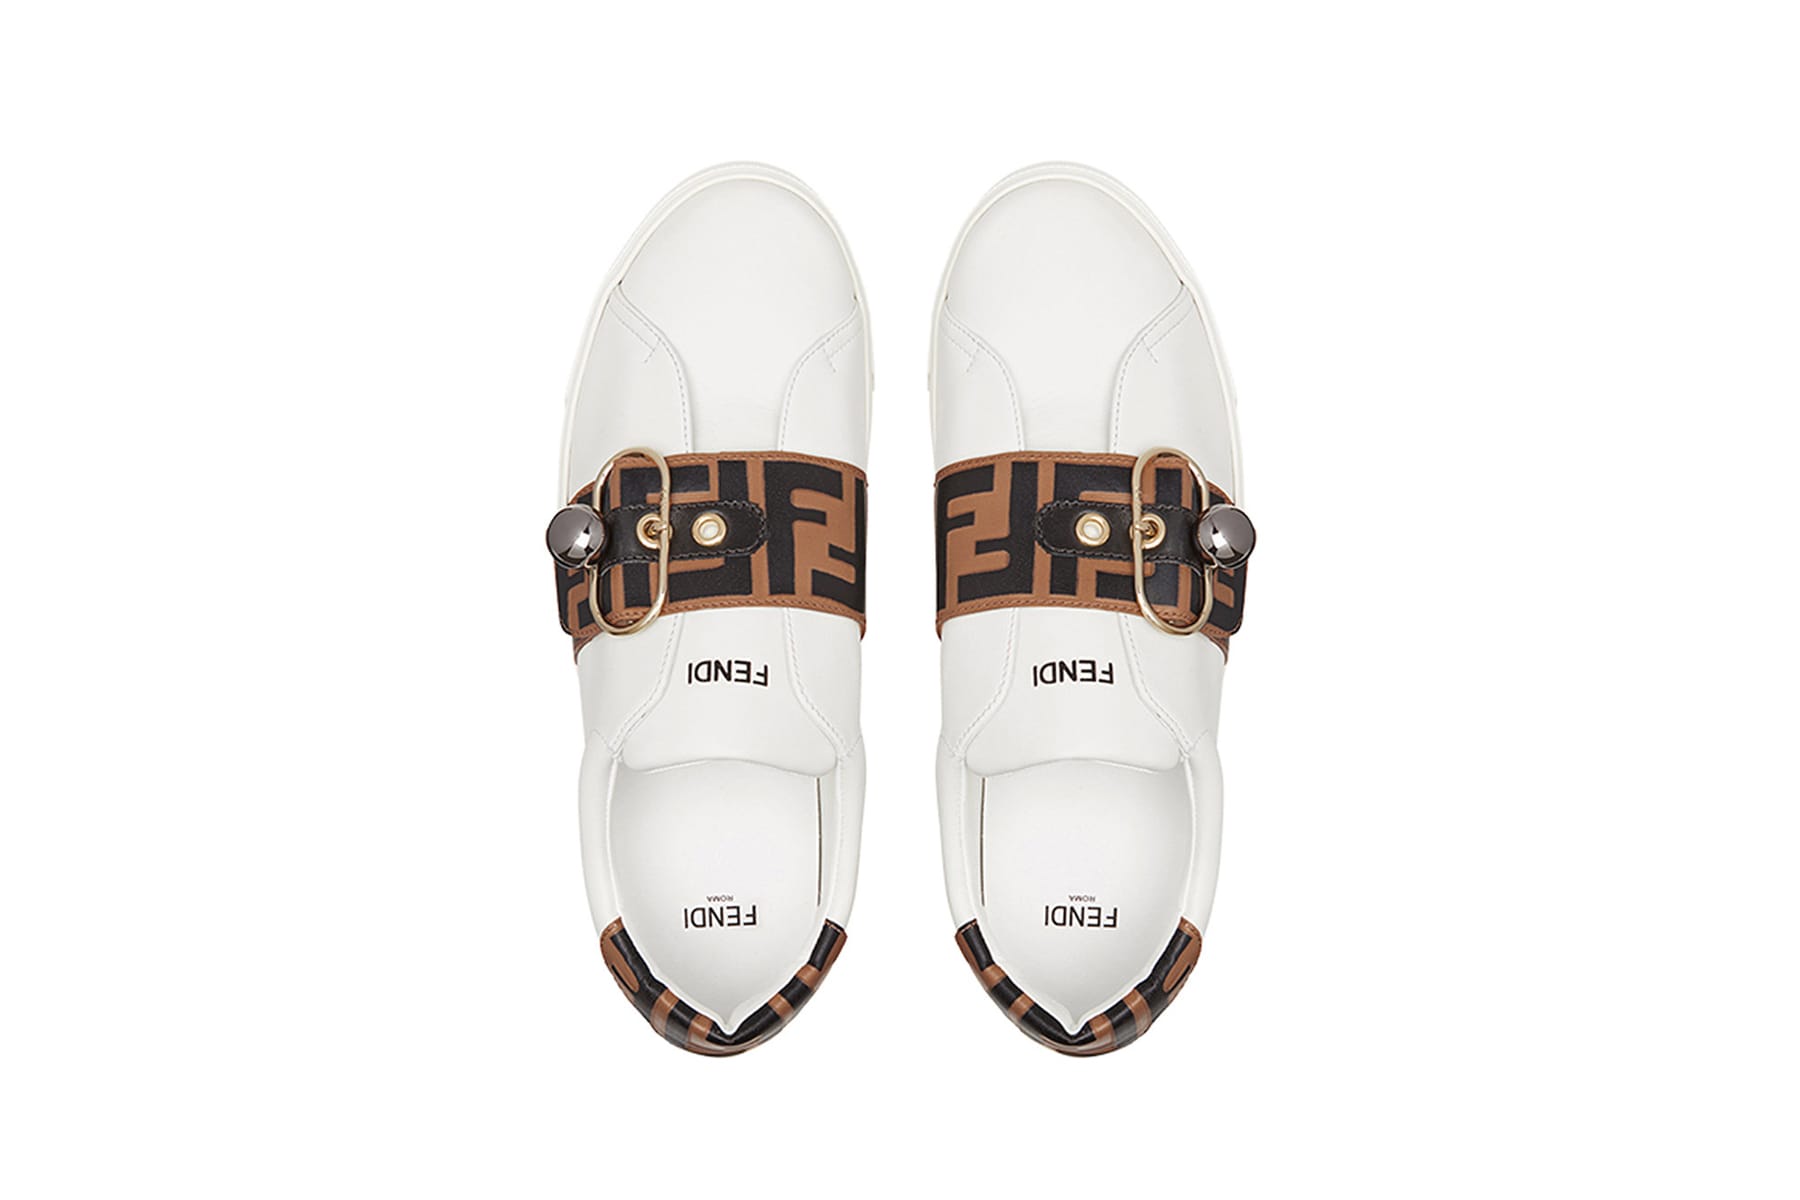 Fendi's FF Band Sneakers Are for the 